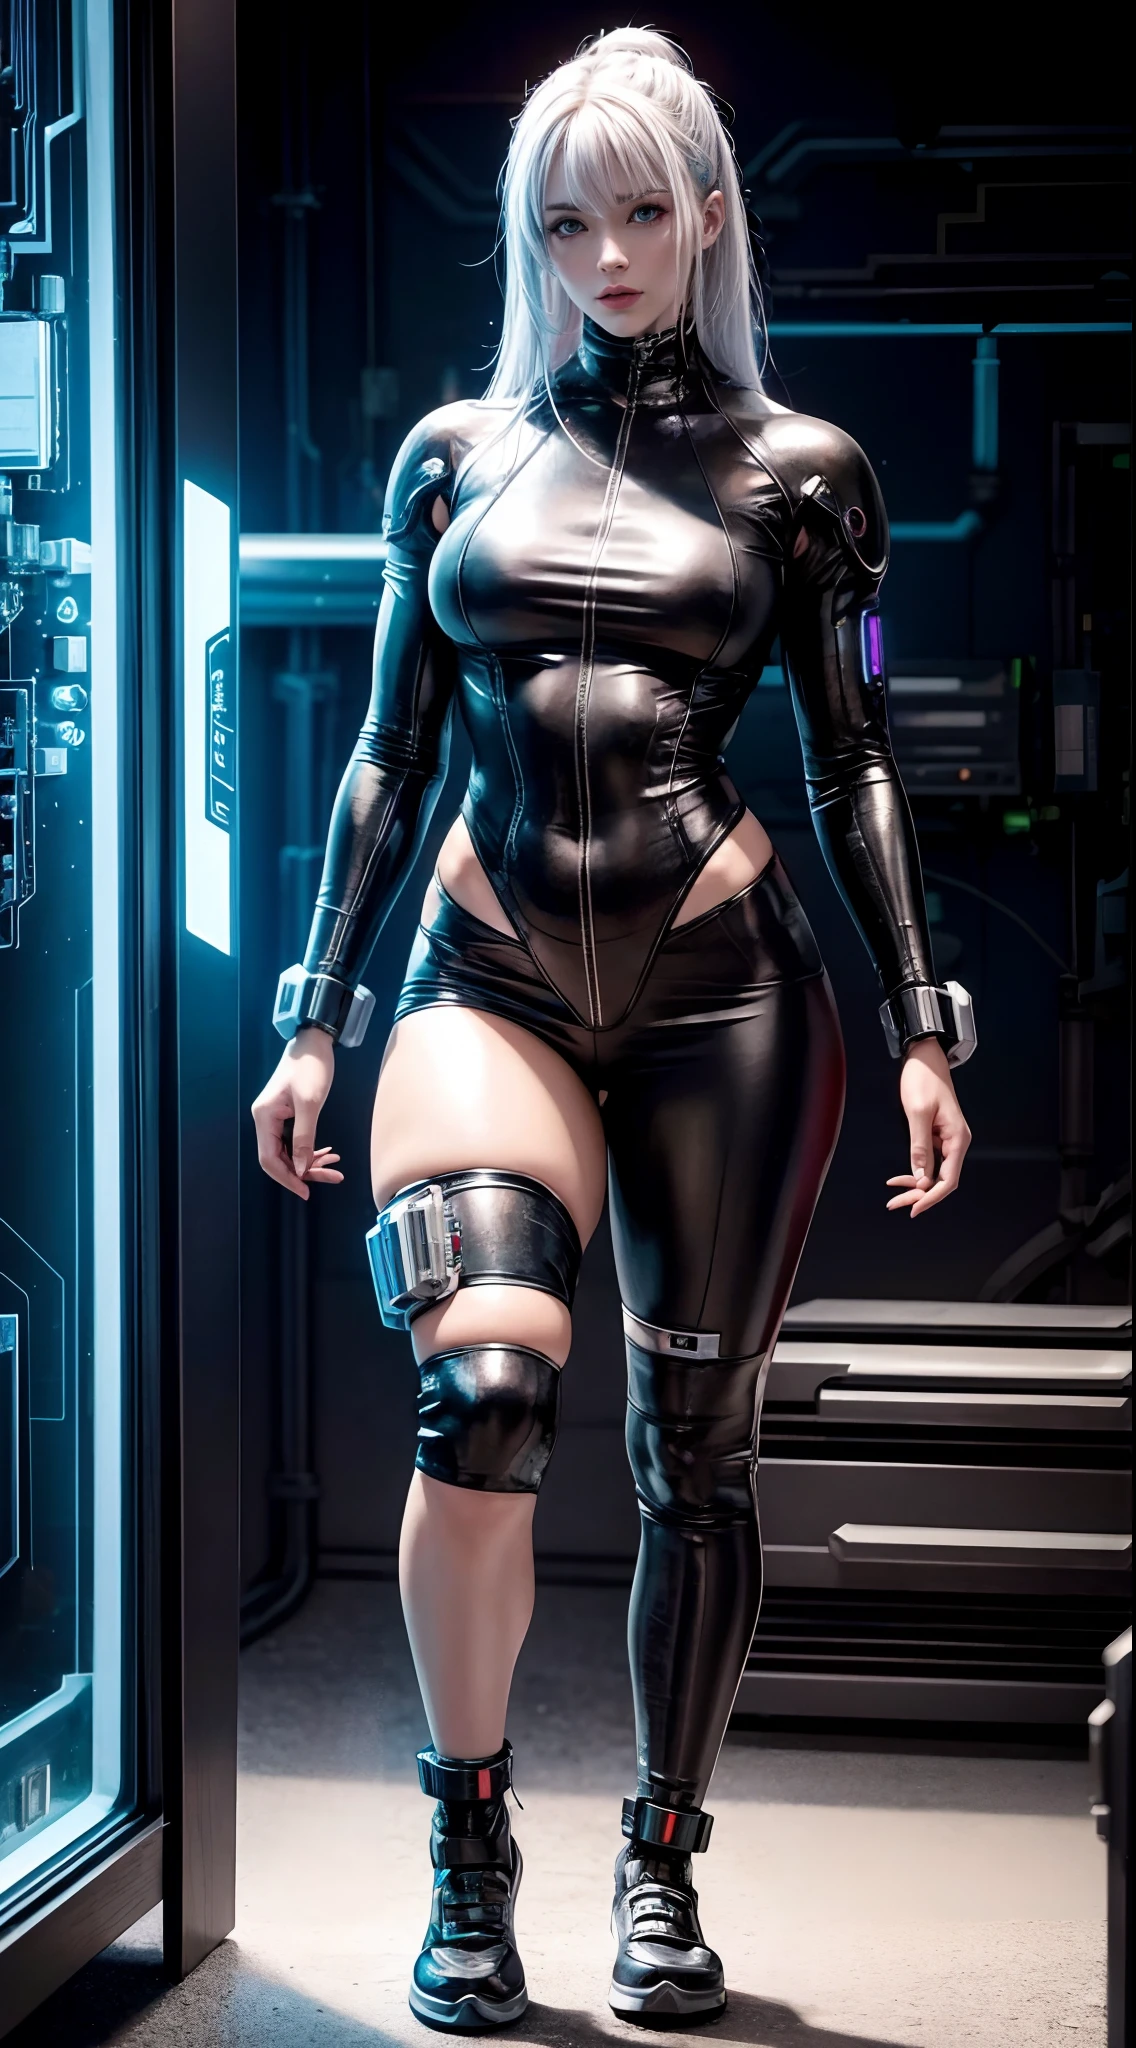 cyberpunk cyborg mechanical girl Aesthetically pleasing physique with parts that are transparent, cyborg,while others are composed of machinery, wires, and circuit boards.concept design, award winning, polycarbonate, pcb, wires, electronics, fully visible mechanical components